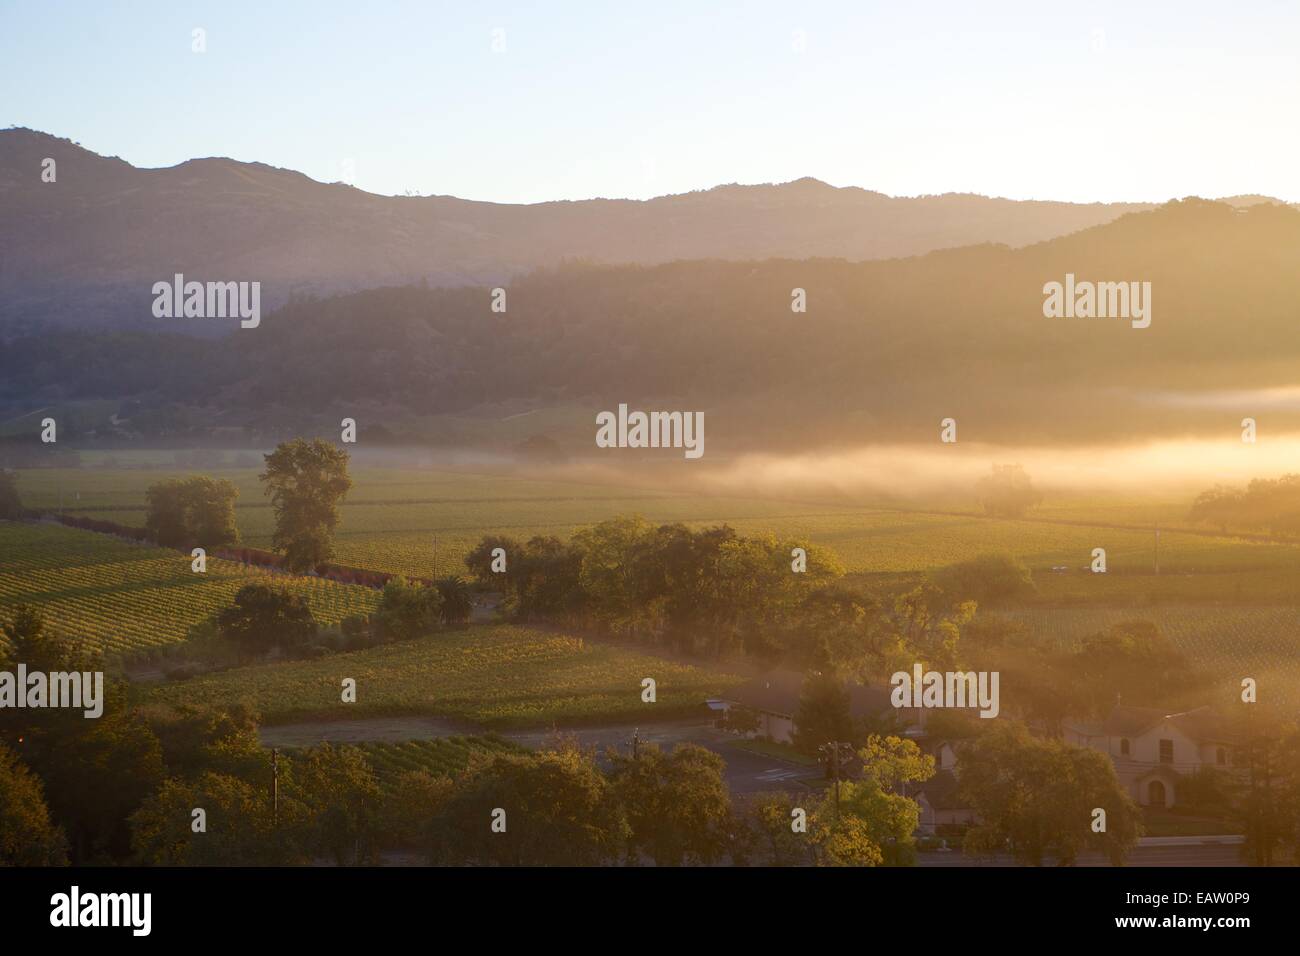 Hot air ballooning in the Napa Valley, California's famous wine country. Stock Photo